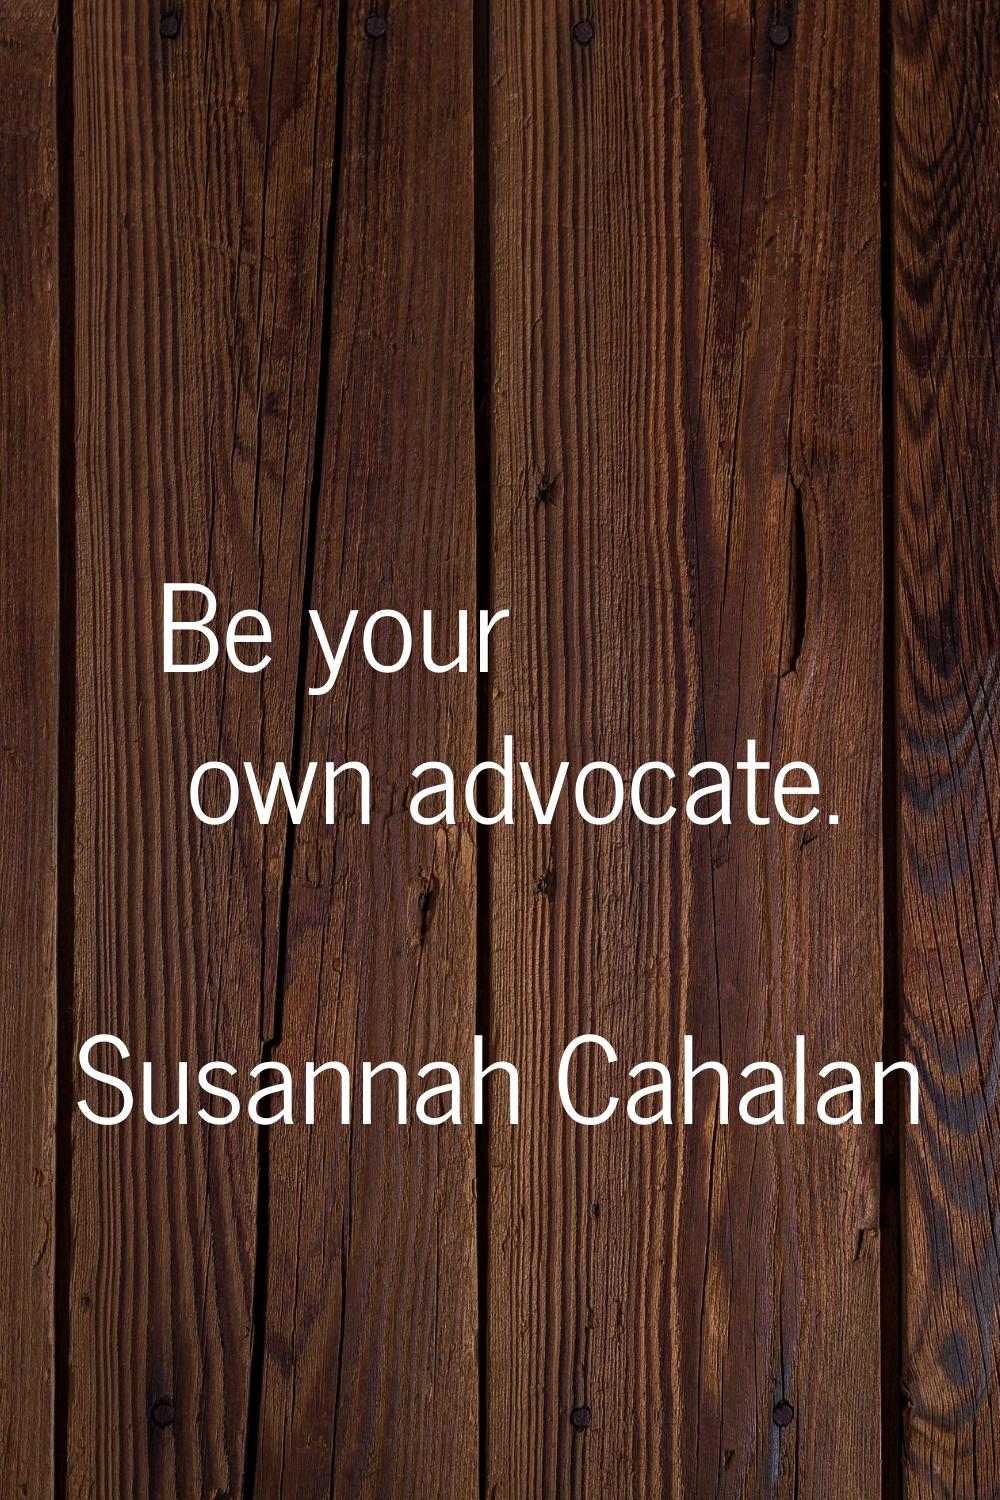 Be your own advocate.